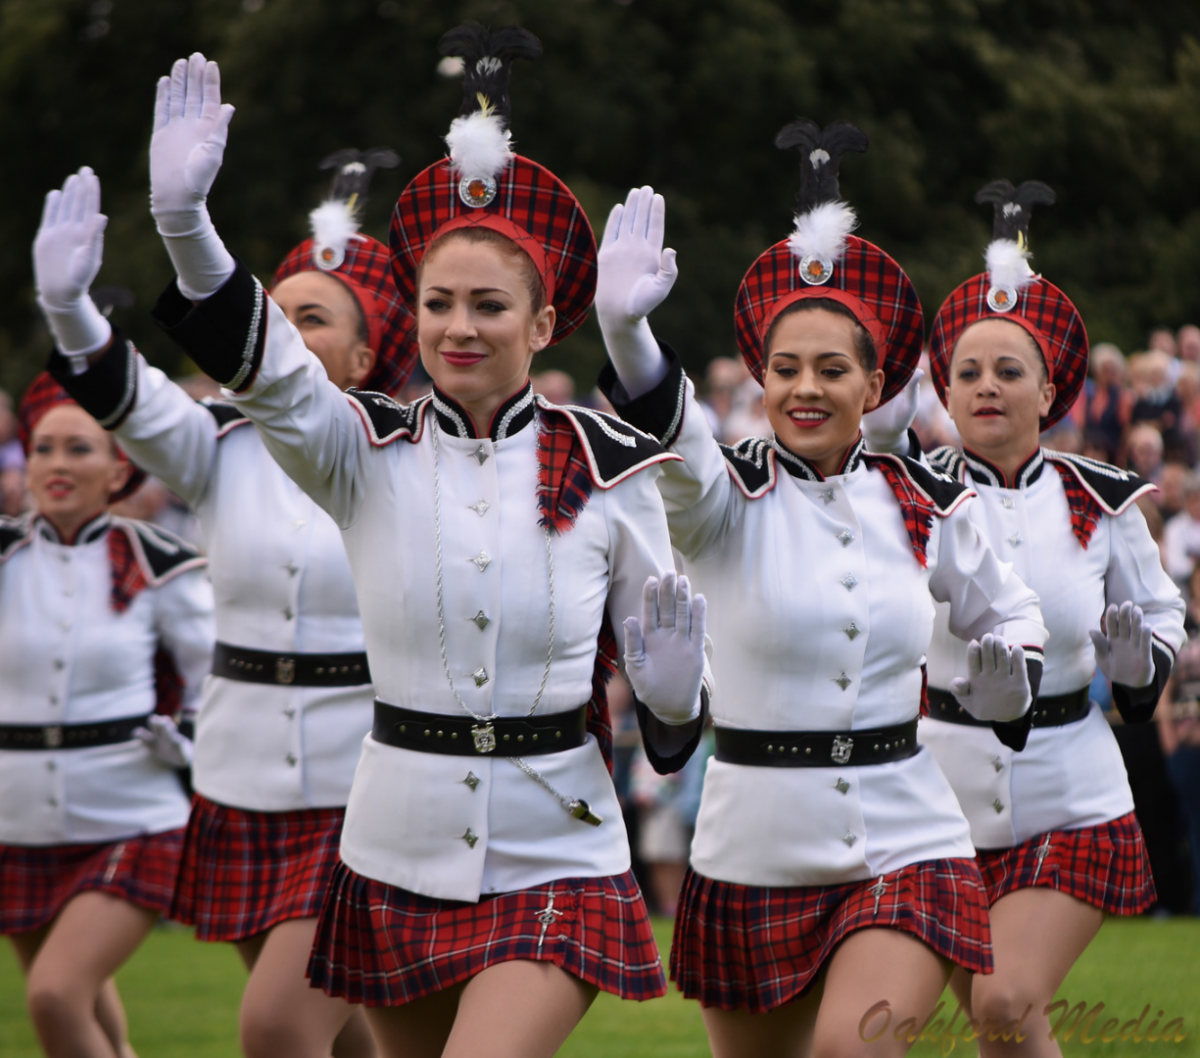 The dancing, music and parade from the Royal Edinburgh Military Tattoo was absolutely spectacular at the North Inch in Perth.